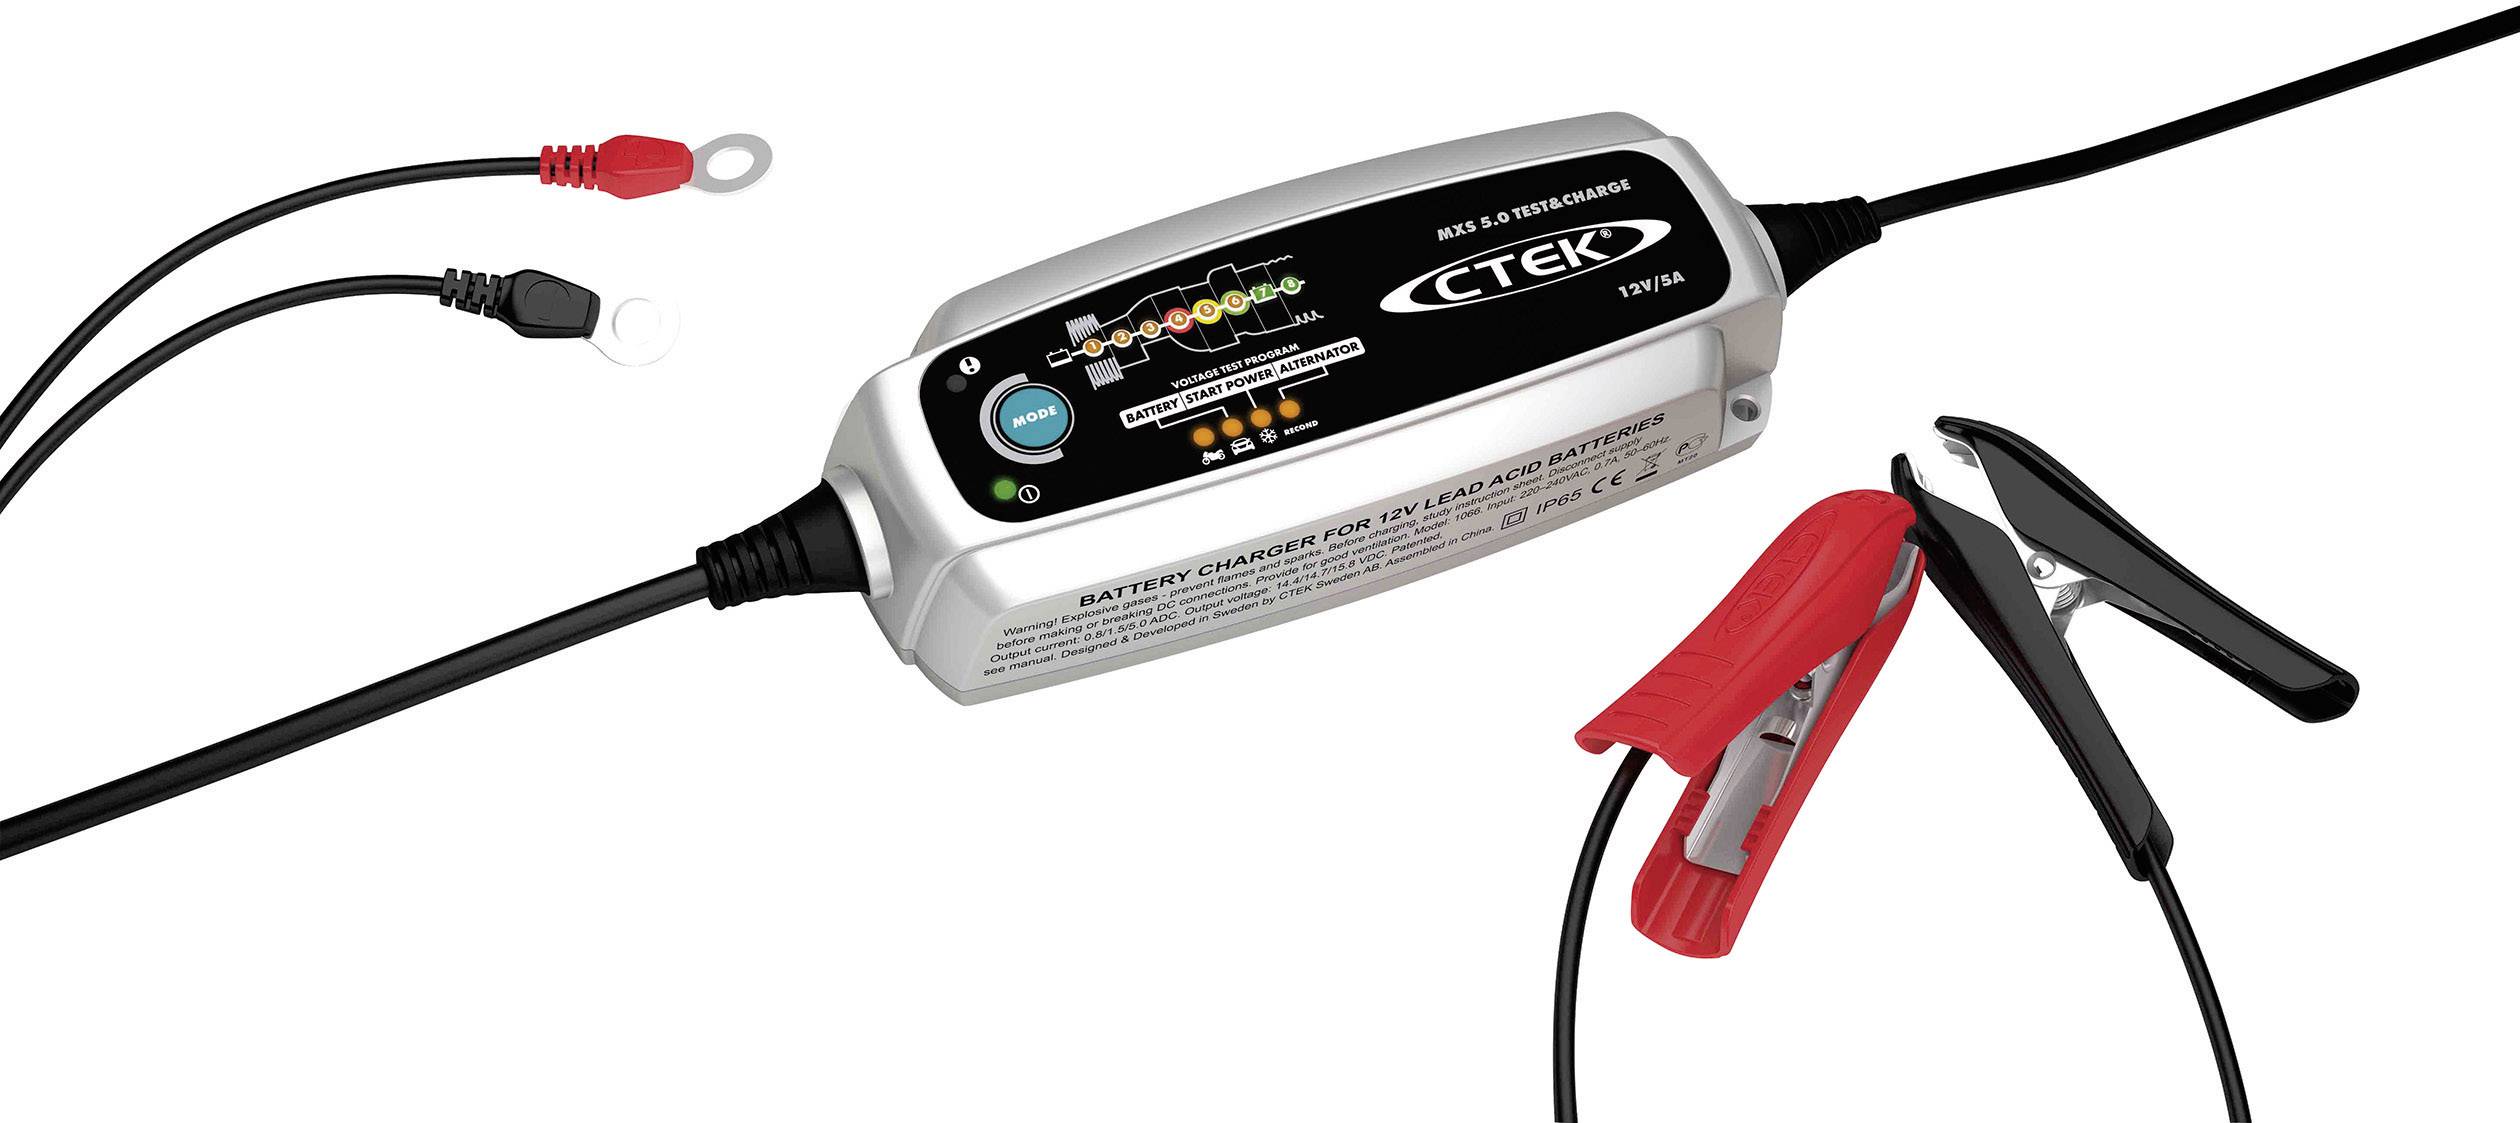 CTEK Battery Charger/Tester Cable for MUS 4.3 Test Charge 56-959 Step Automatic